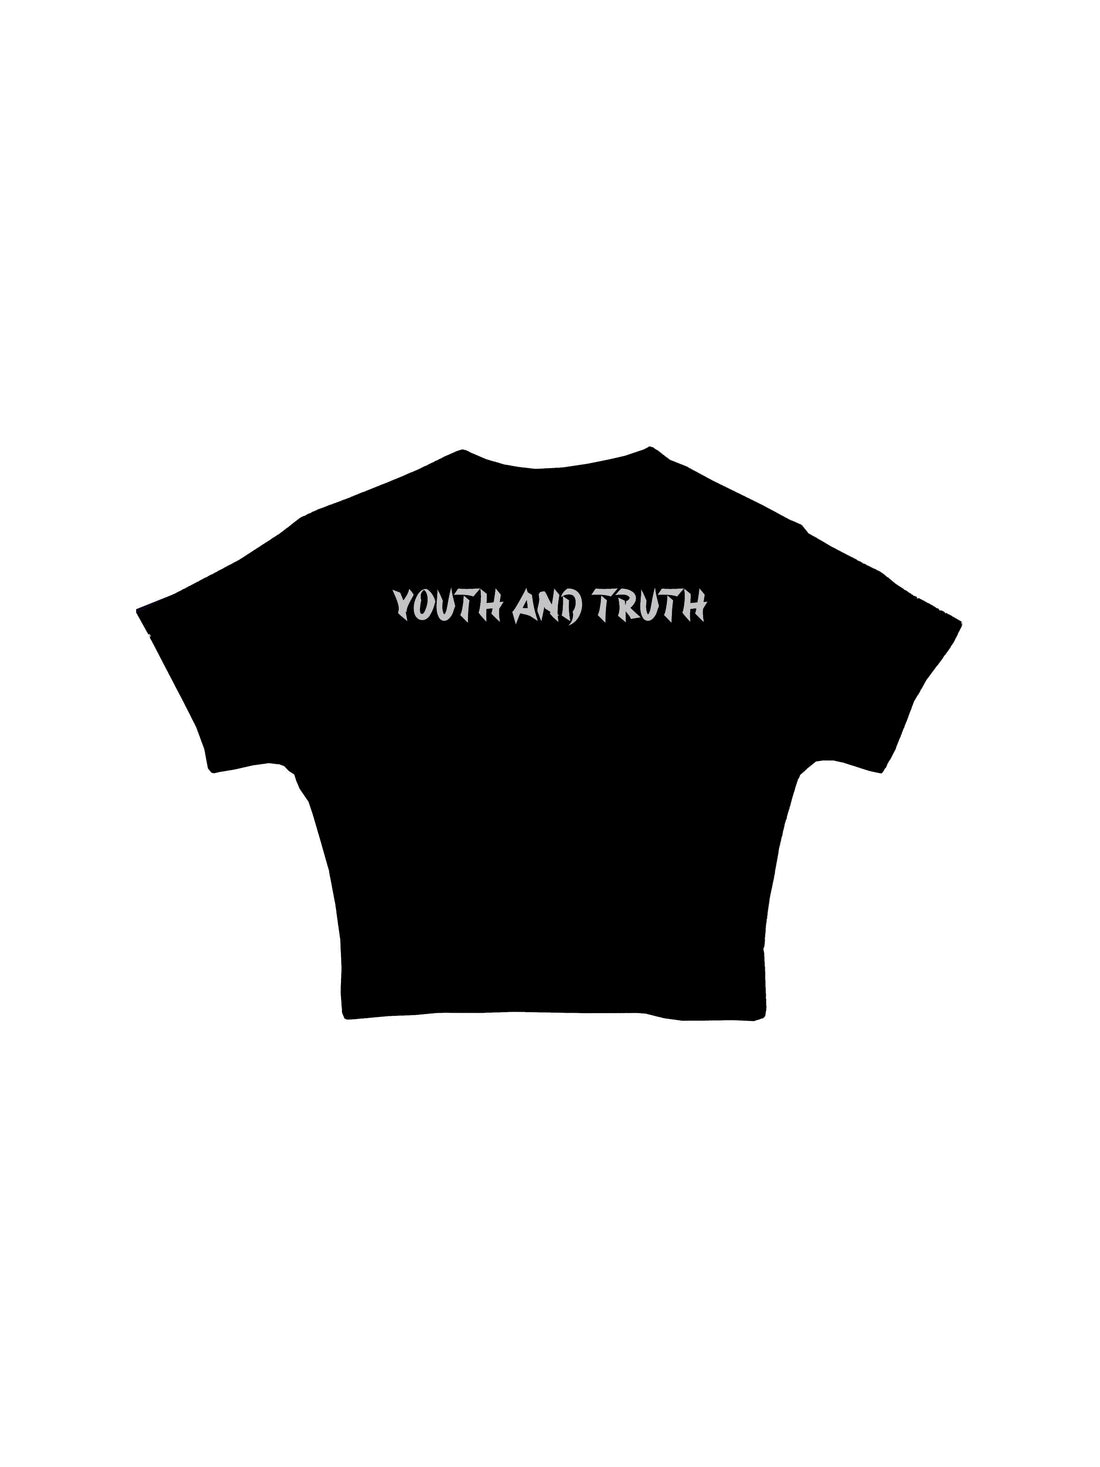 Youth And Truth (Reflective) - Burger Bae Round Neck Crop Baby Tee For Women